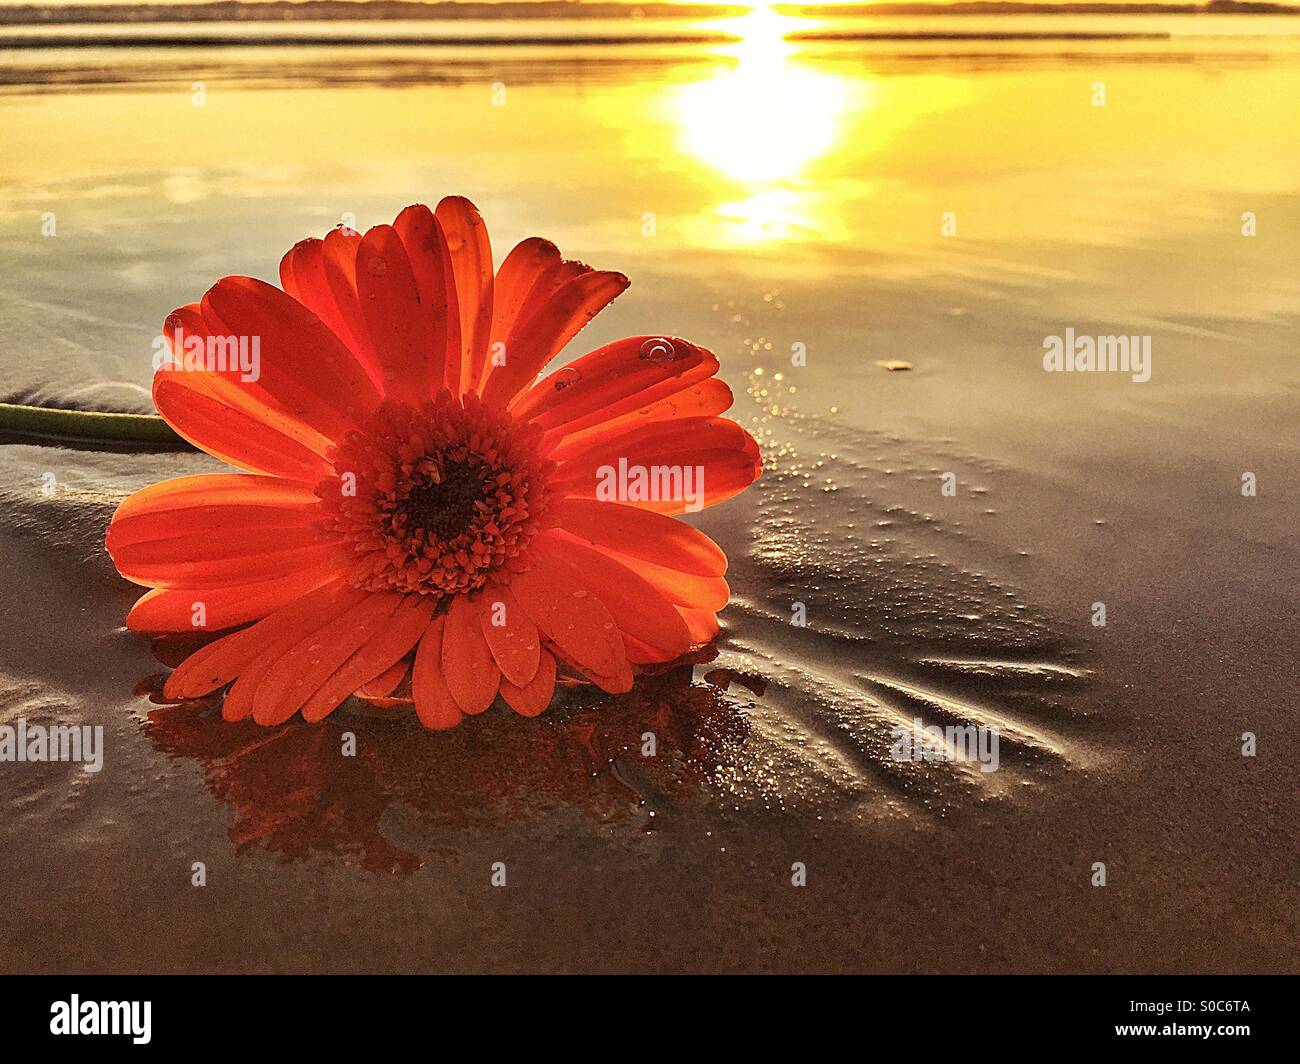 One Flower Left On The Beach At Sunset In Remembrance Of A Loved One's Passing Stock Photo